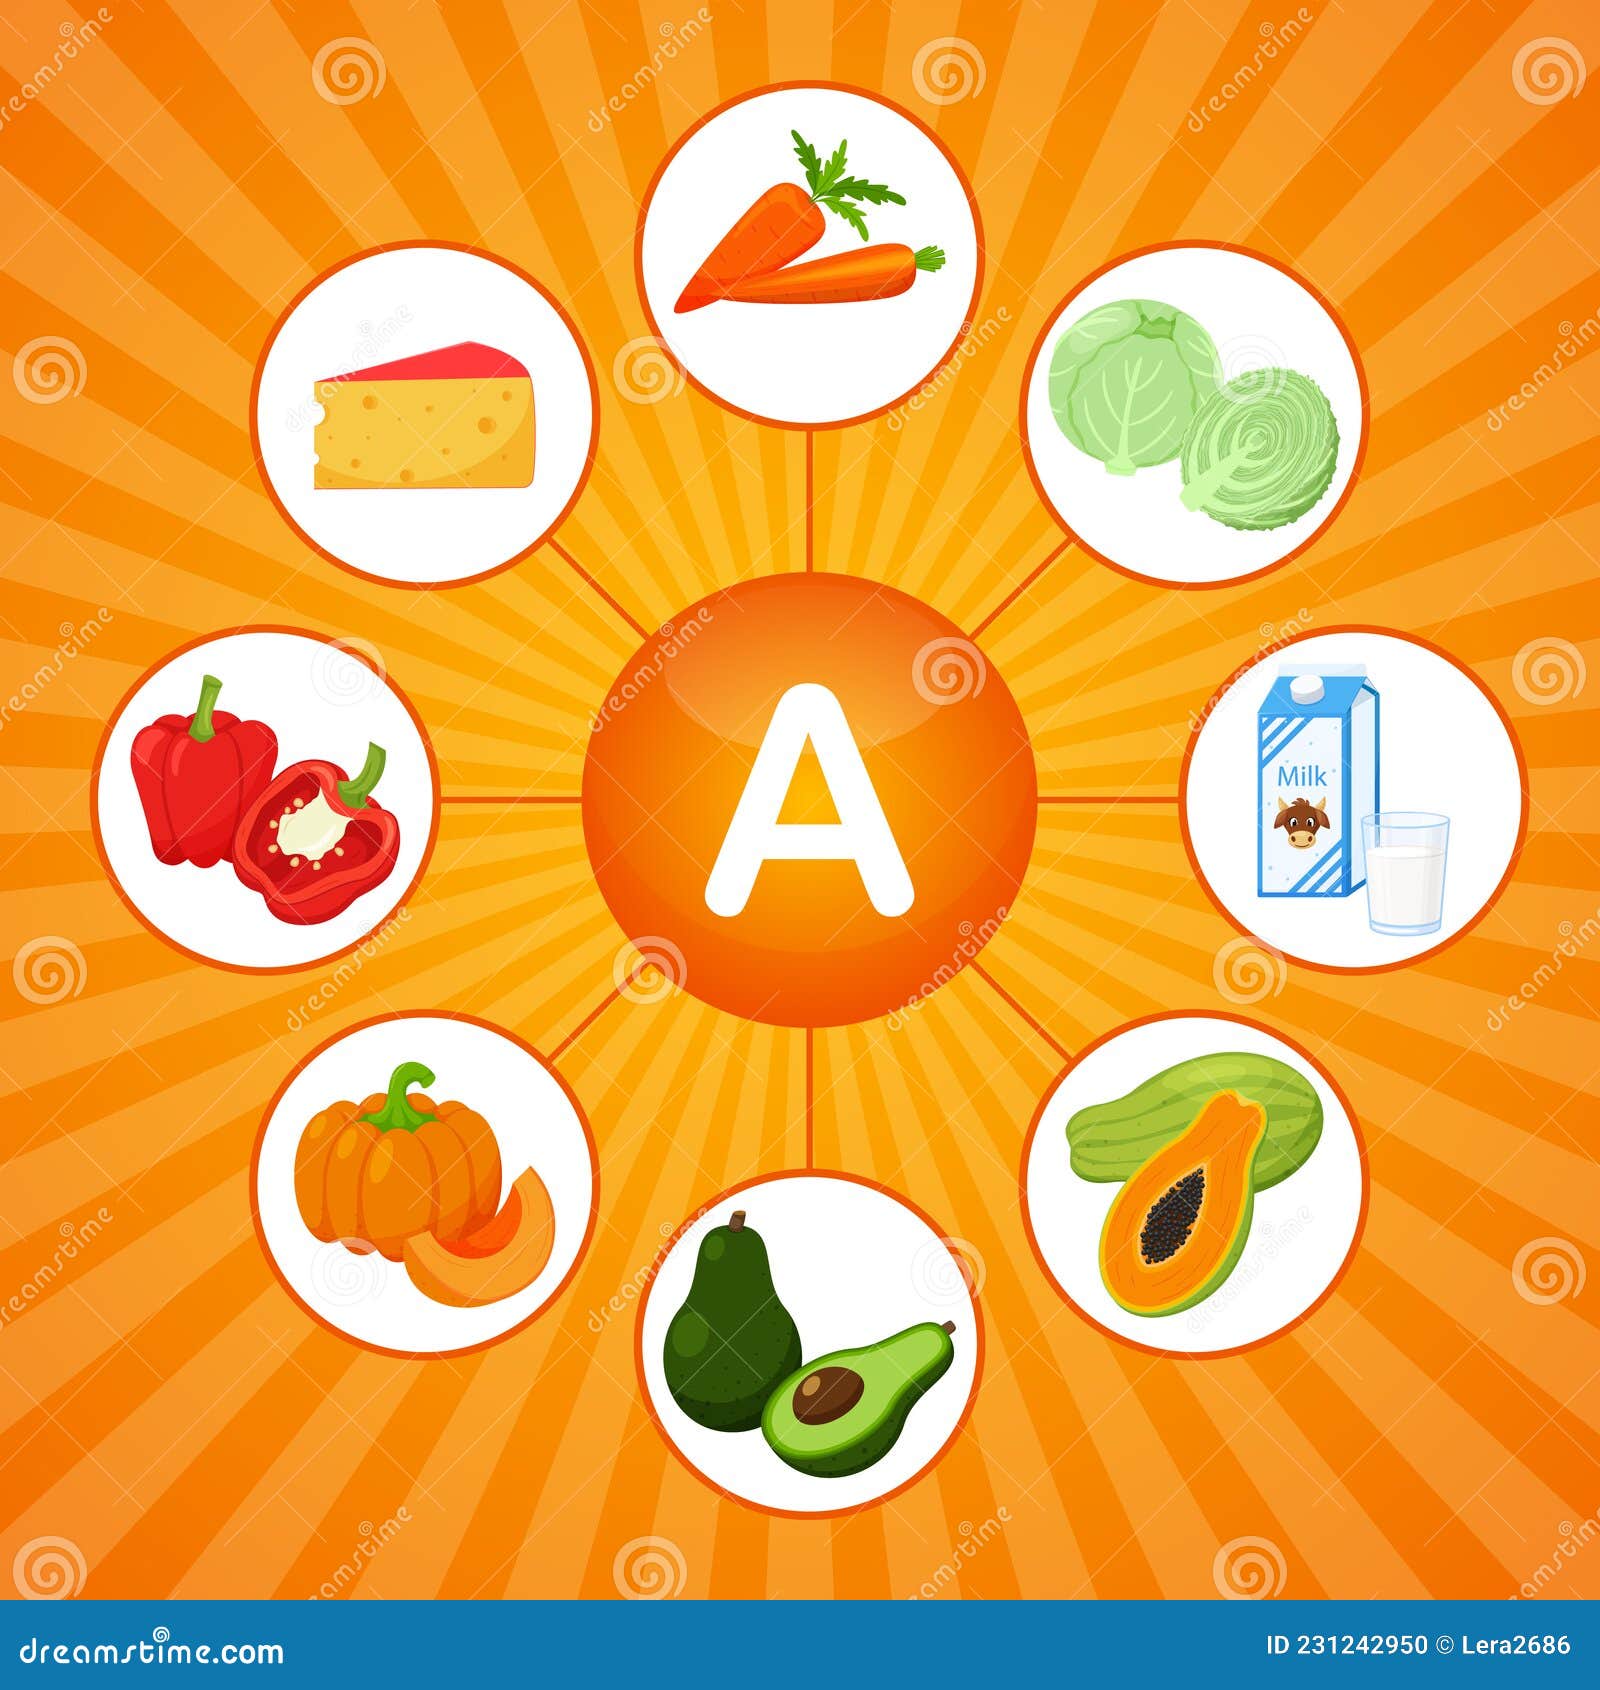 https://thumbs.dreamstime.com/z/square-poster-food-products-containing-vitamin-retinol-medicine-diet-healthy-eating-infographics-flat-cartoon-elements-231242950.jpg